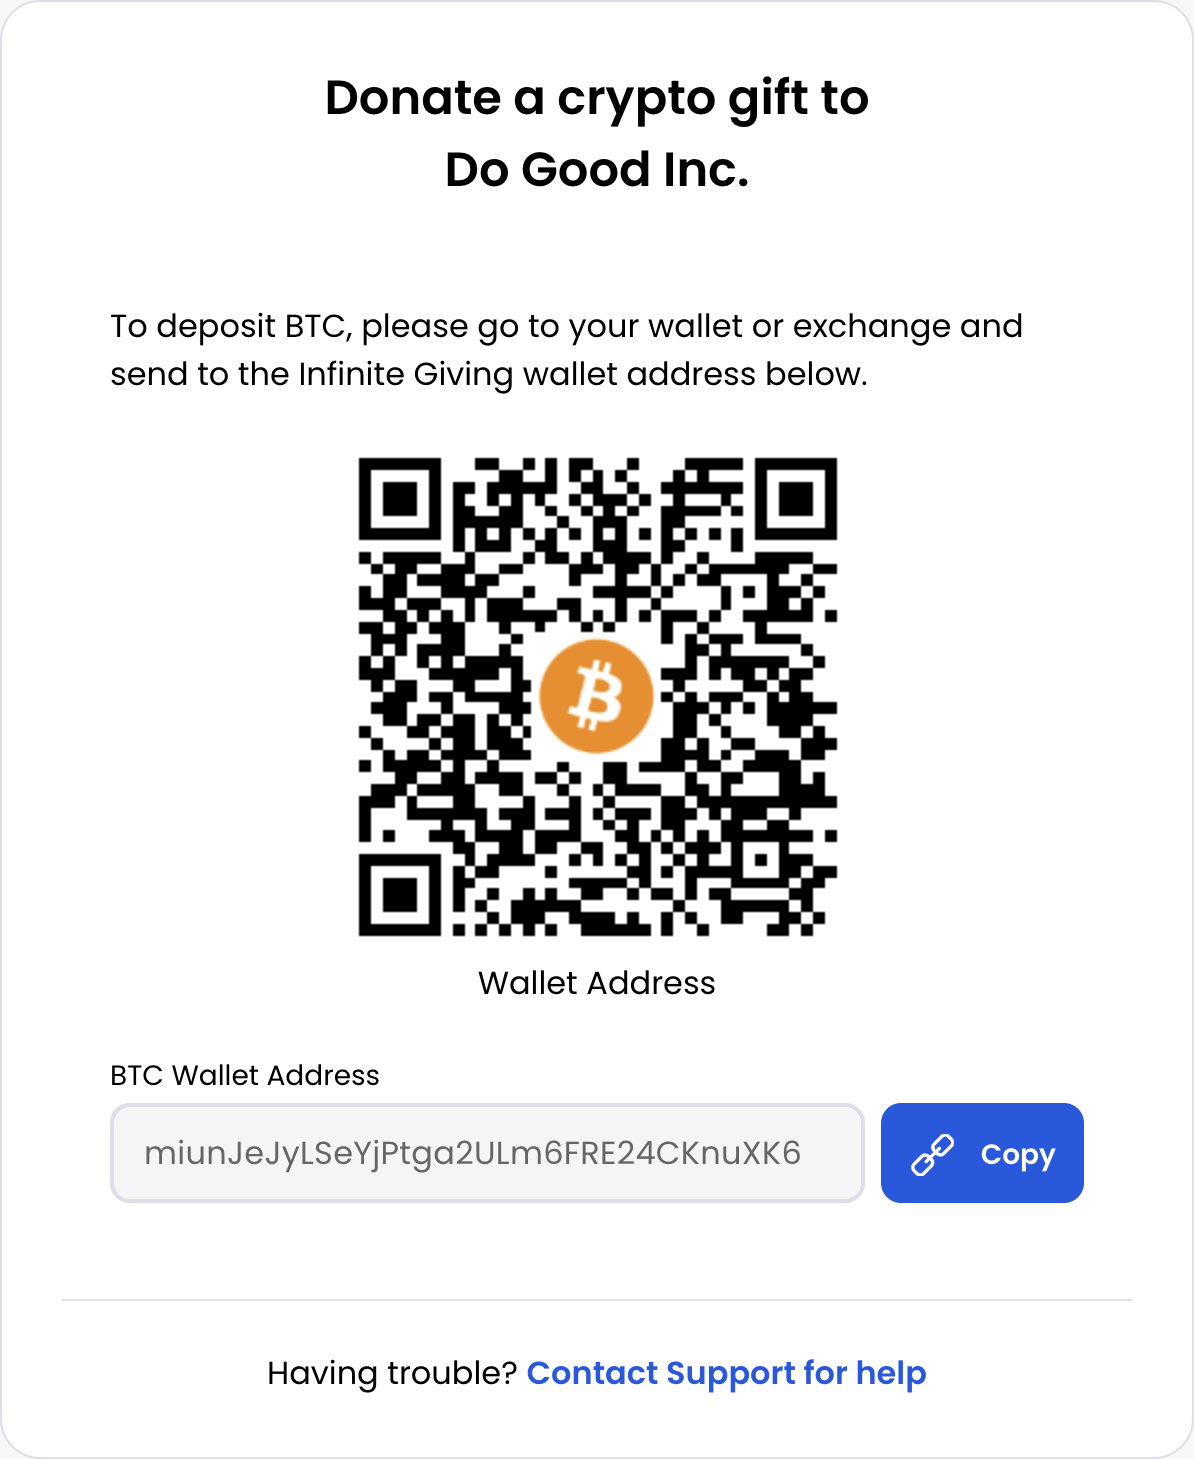 Receiving donations with bitcoin - Bitcoin Wiki